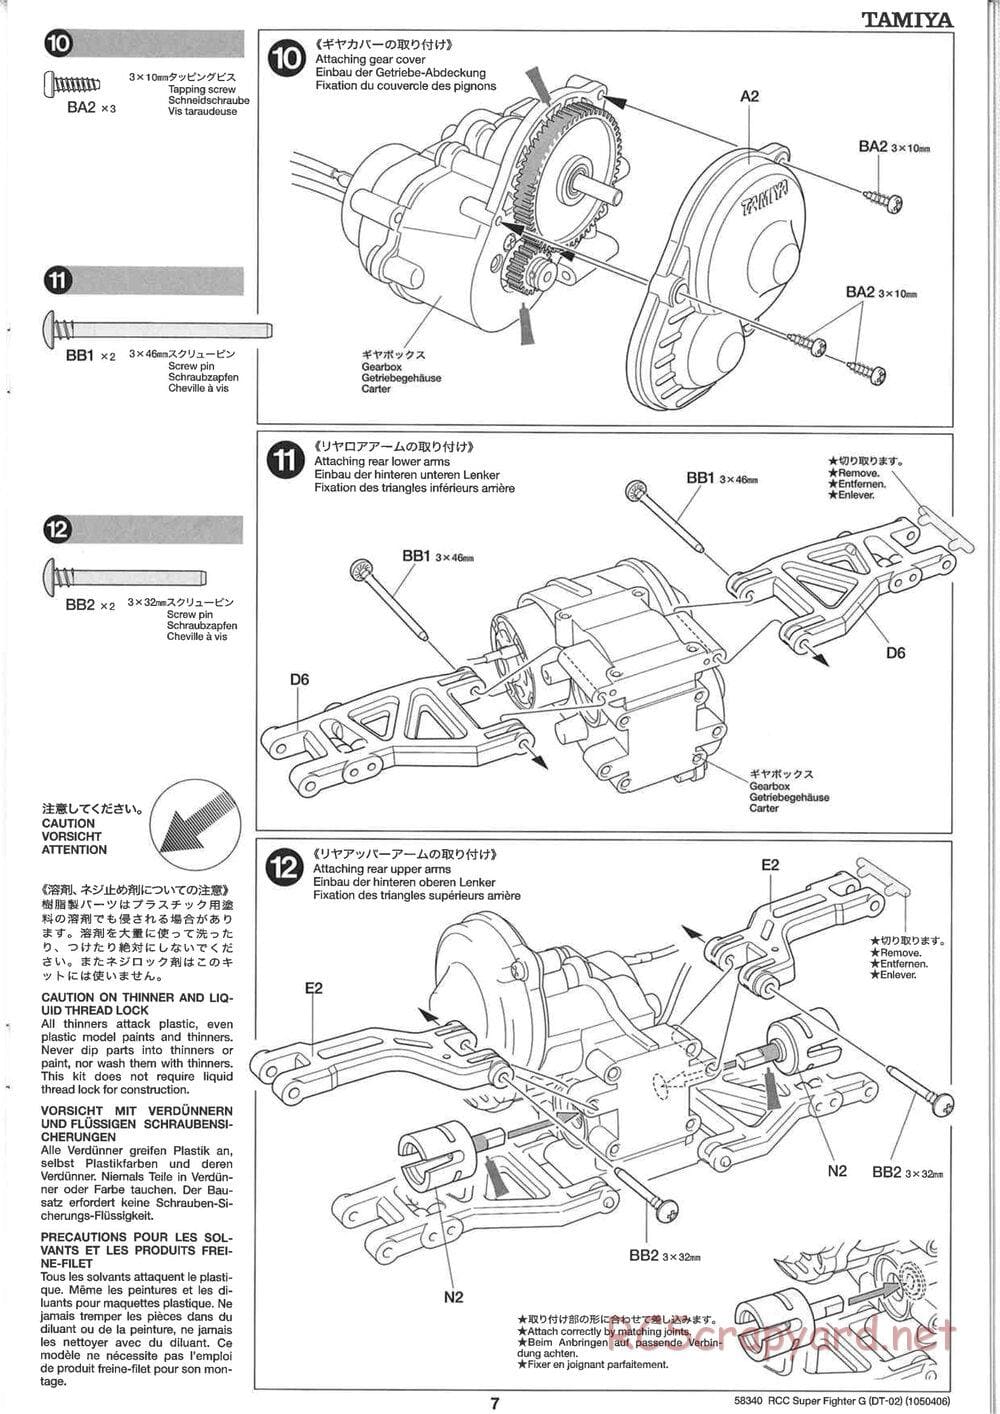 Tamiya - Super Fighter G Chassis - Manual - Page 7